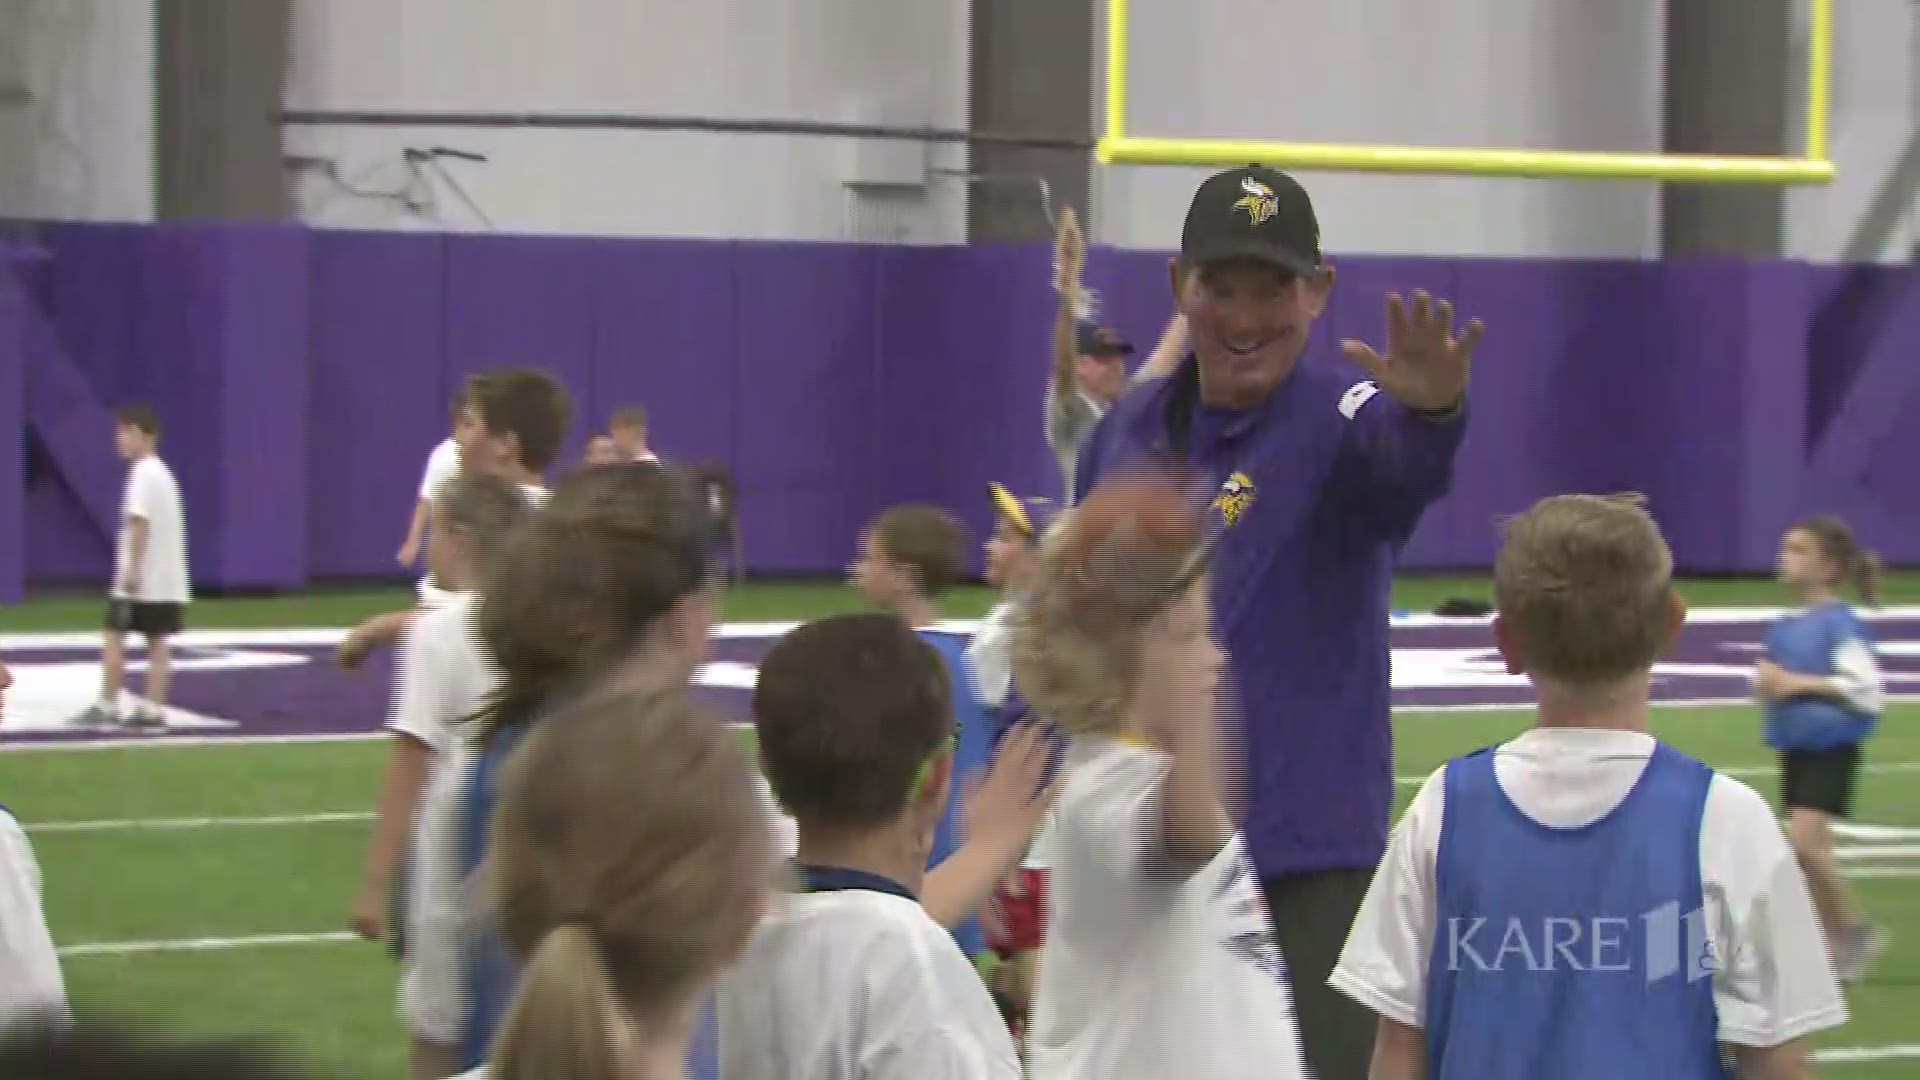 Vikings head coach Mike Zimmer talks about the football camp for kids he's hosting at Twin Cities Orthopedics Performance Center this weekend.